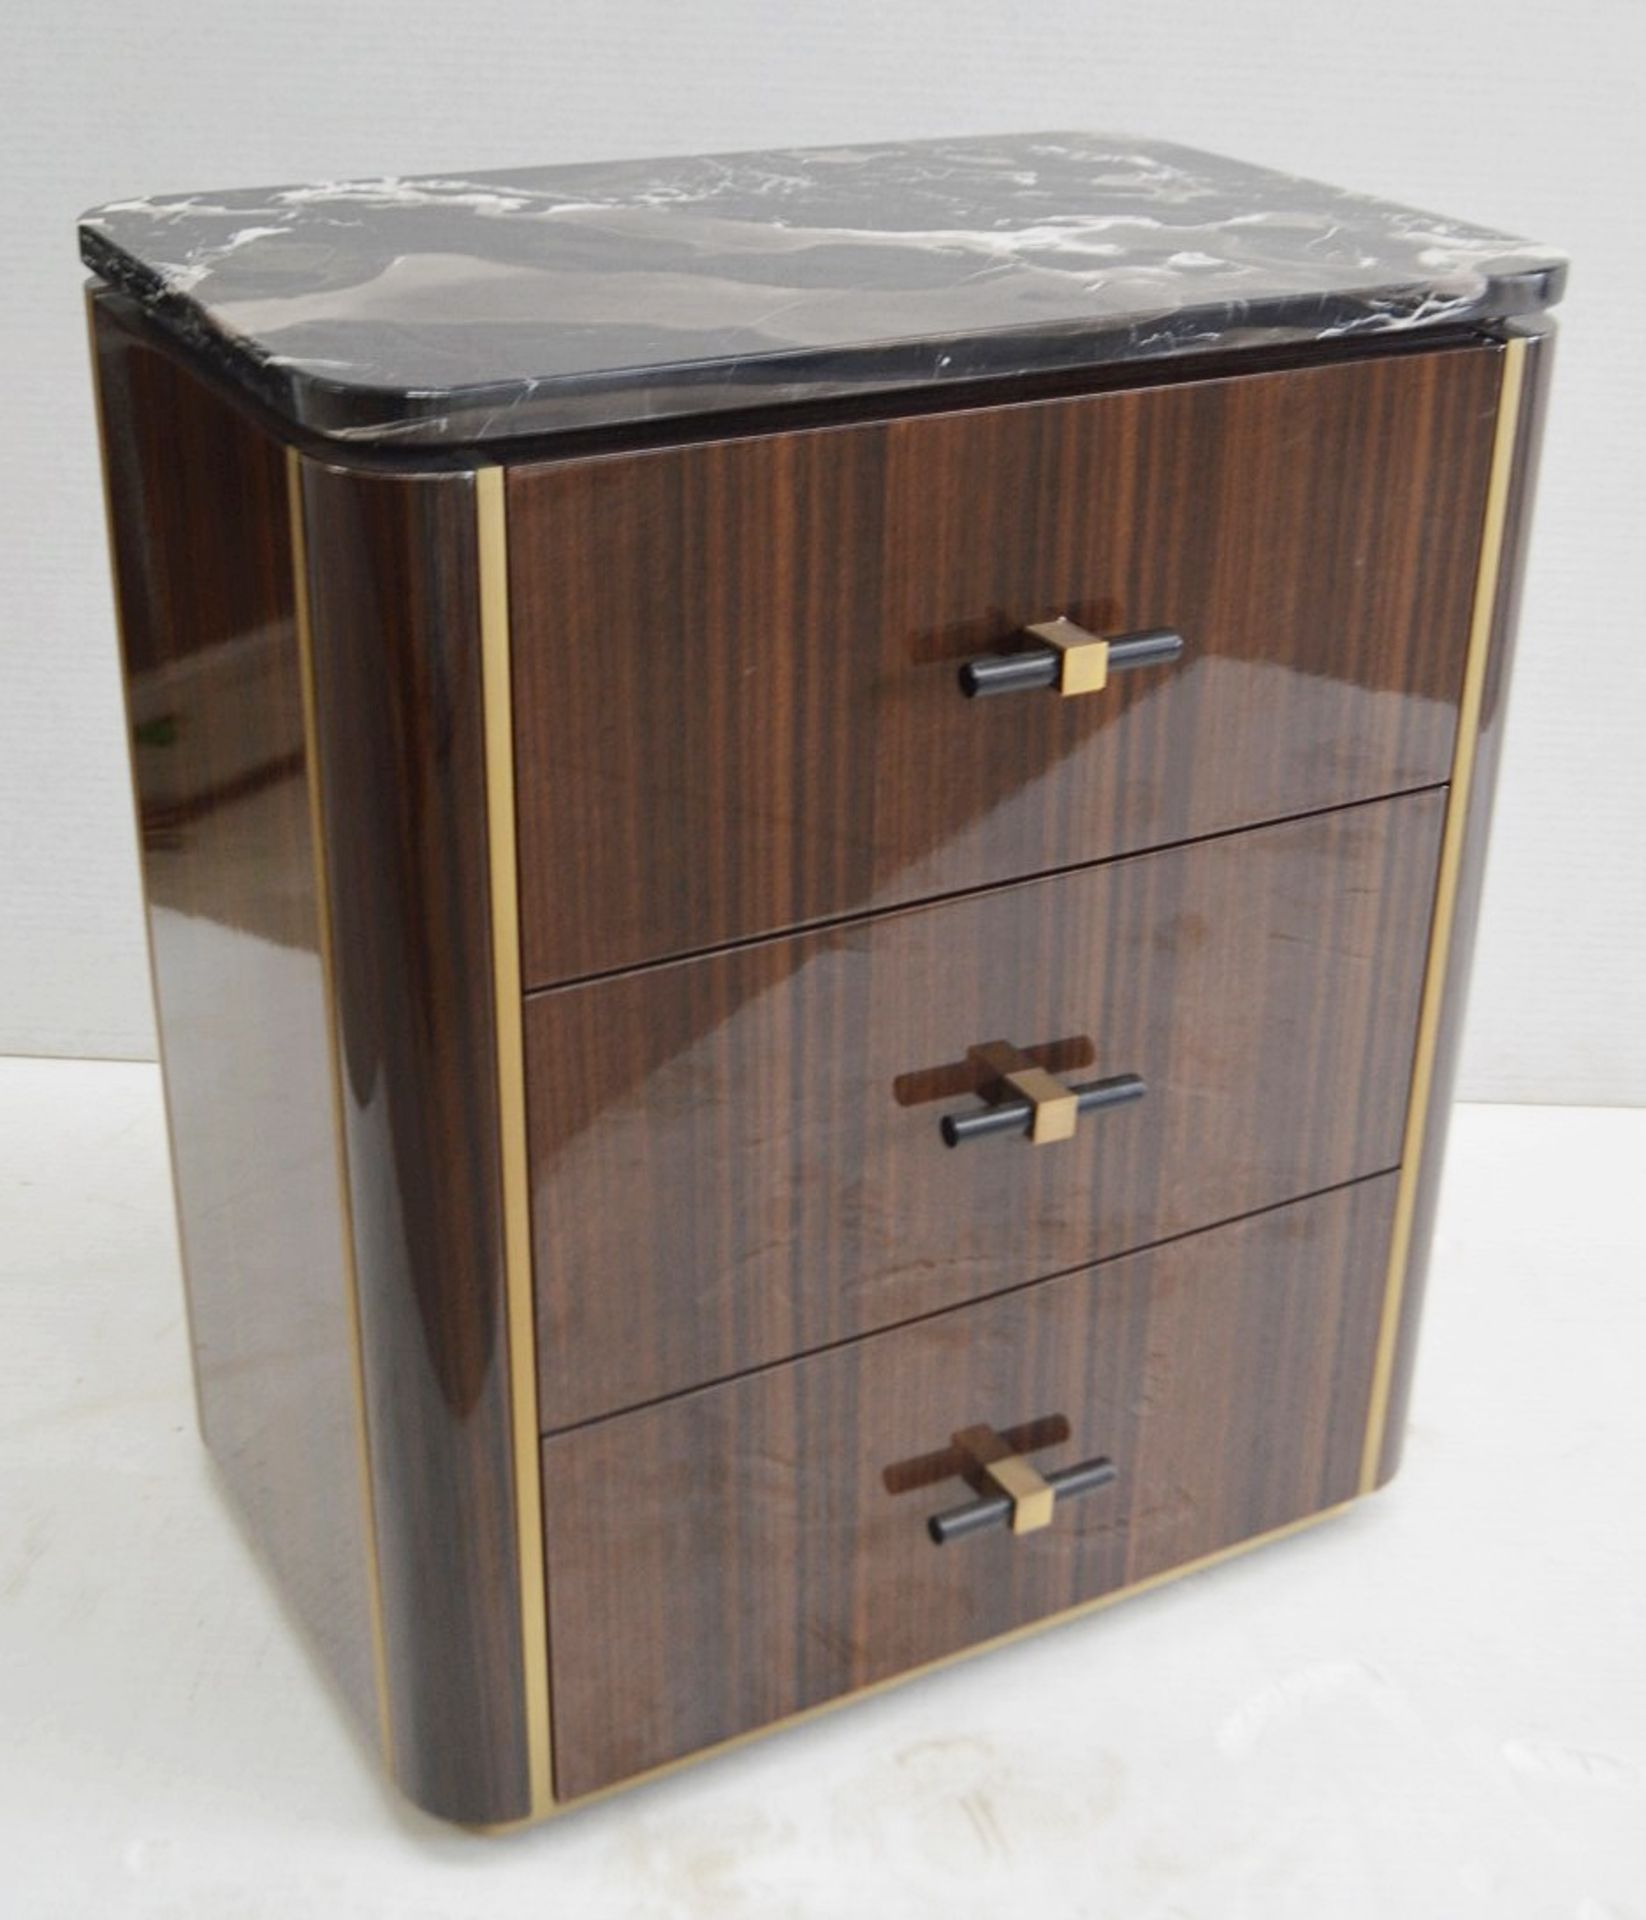 1 x FRATO 'BERNA' Luxury Designer Stone-topped Bedside Table With 3 Soft-close Lined Drawers - Image 3 of 7